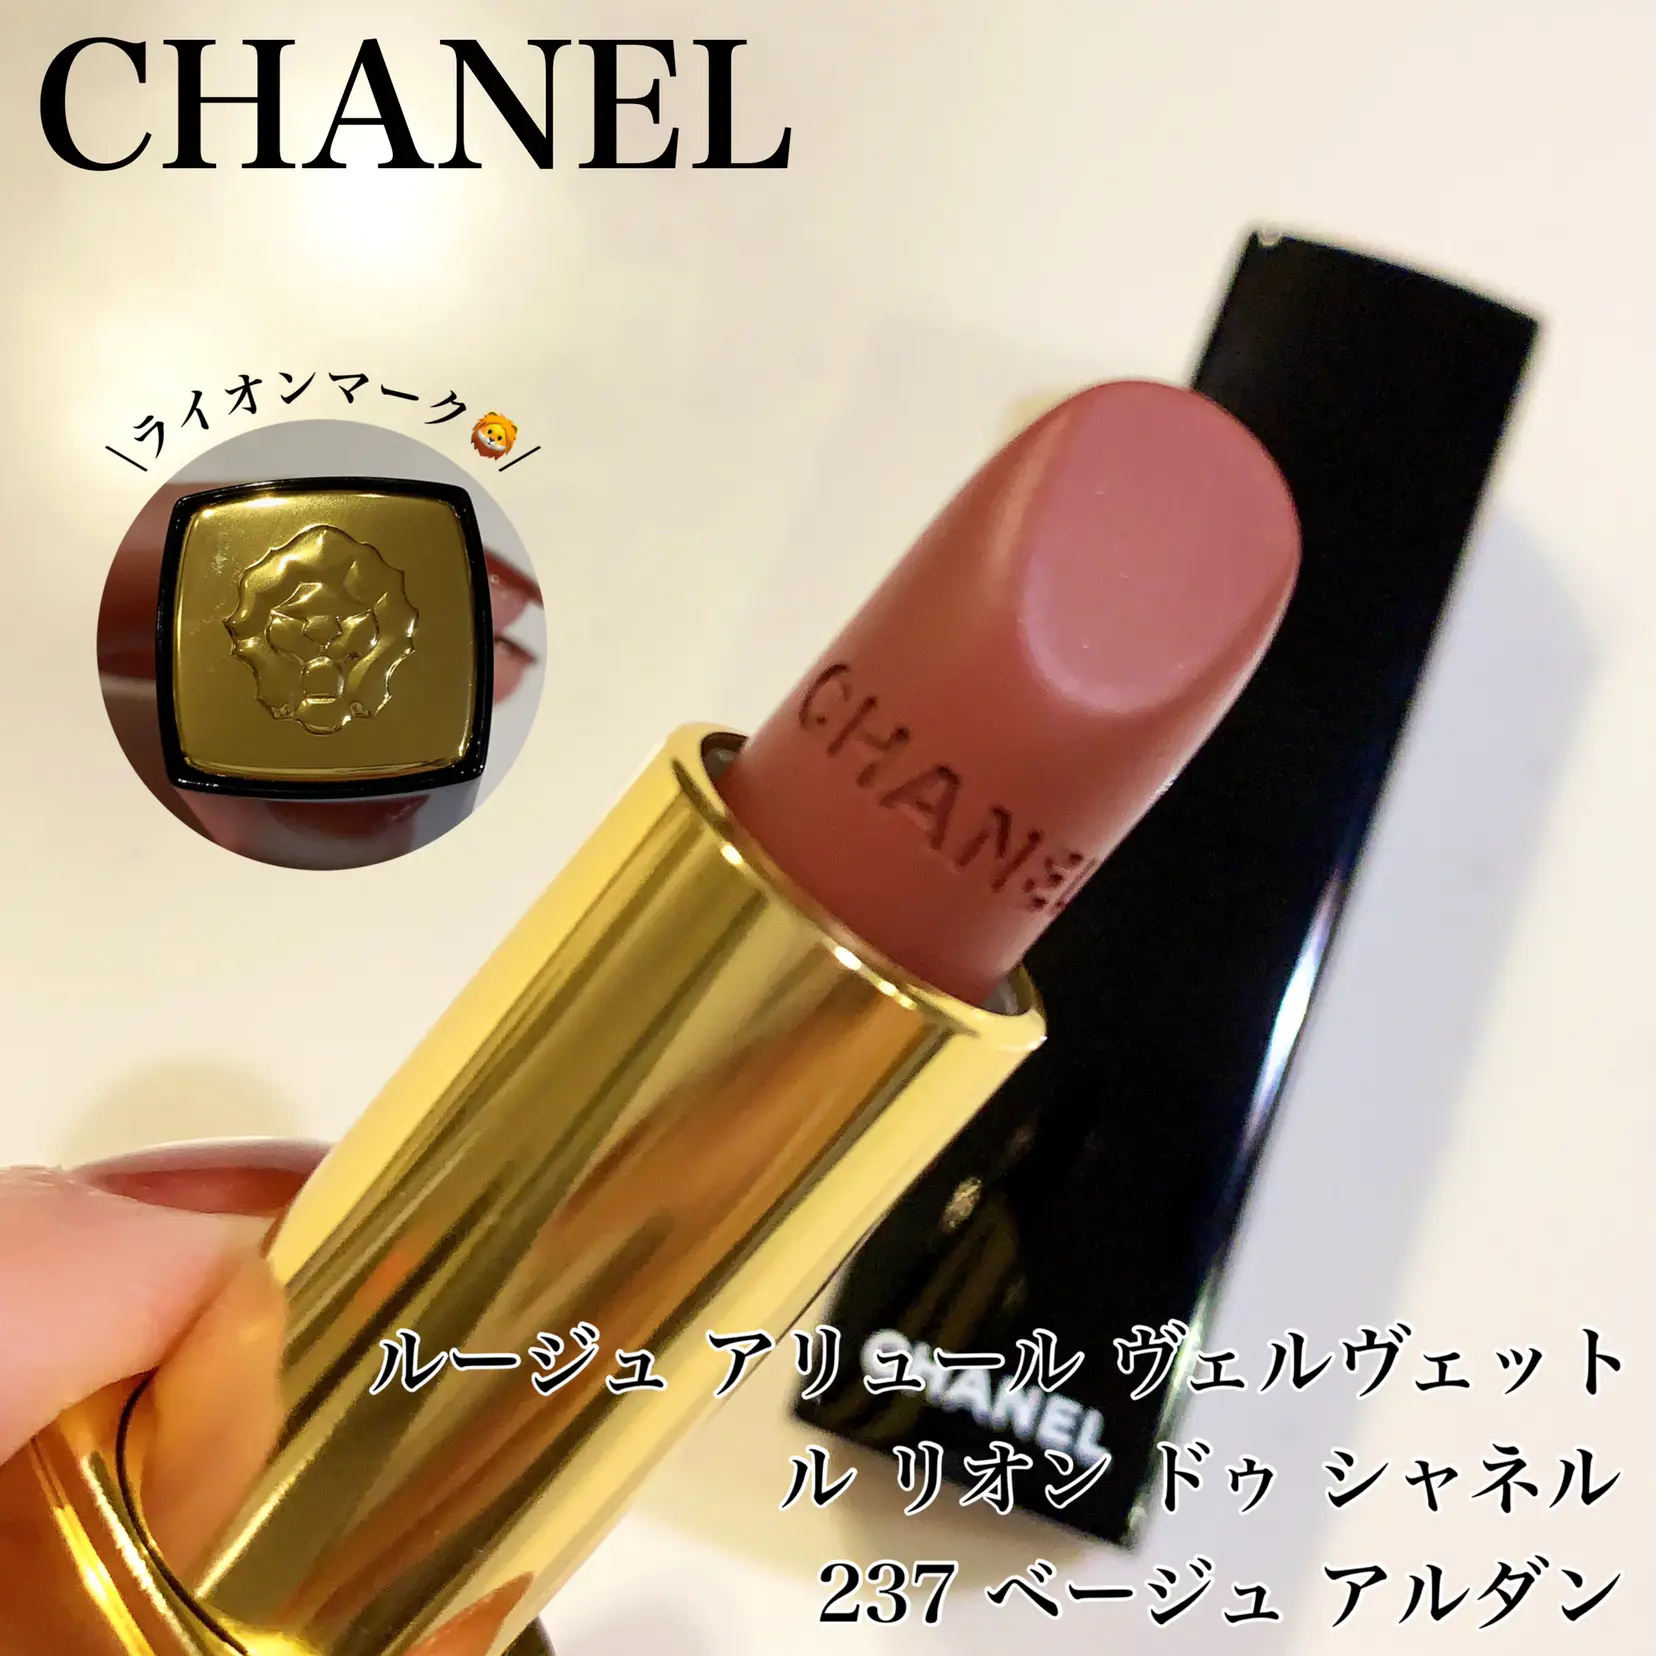 CHANEL LIMITED LION LIP🦁, Gallery posted by eina